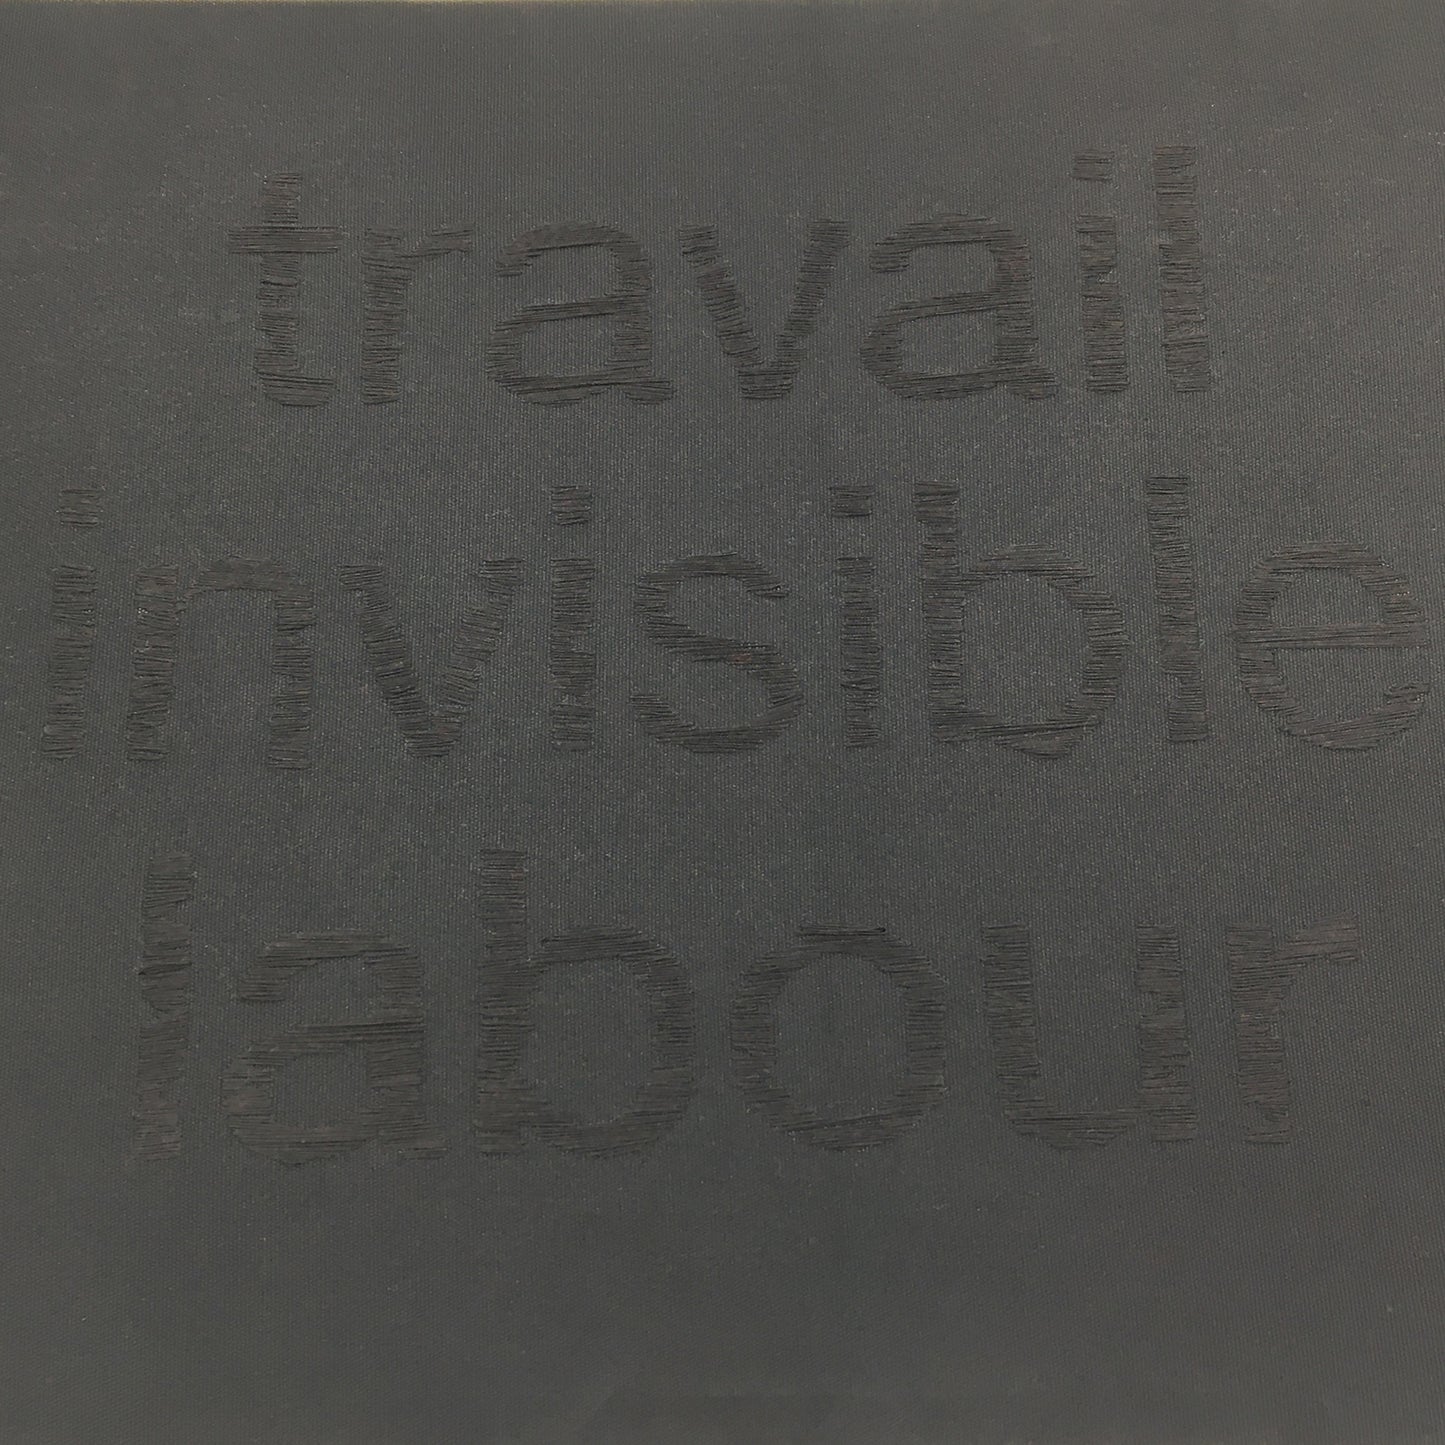 Tribute to my mother II (travail/invisible/labour)